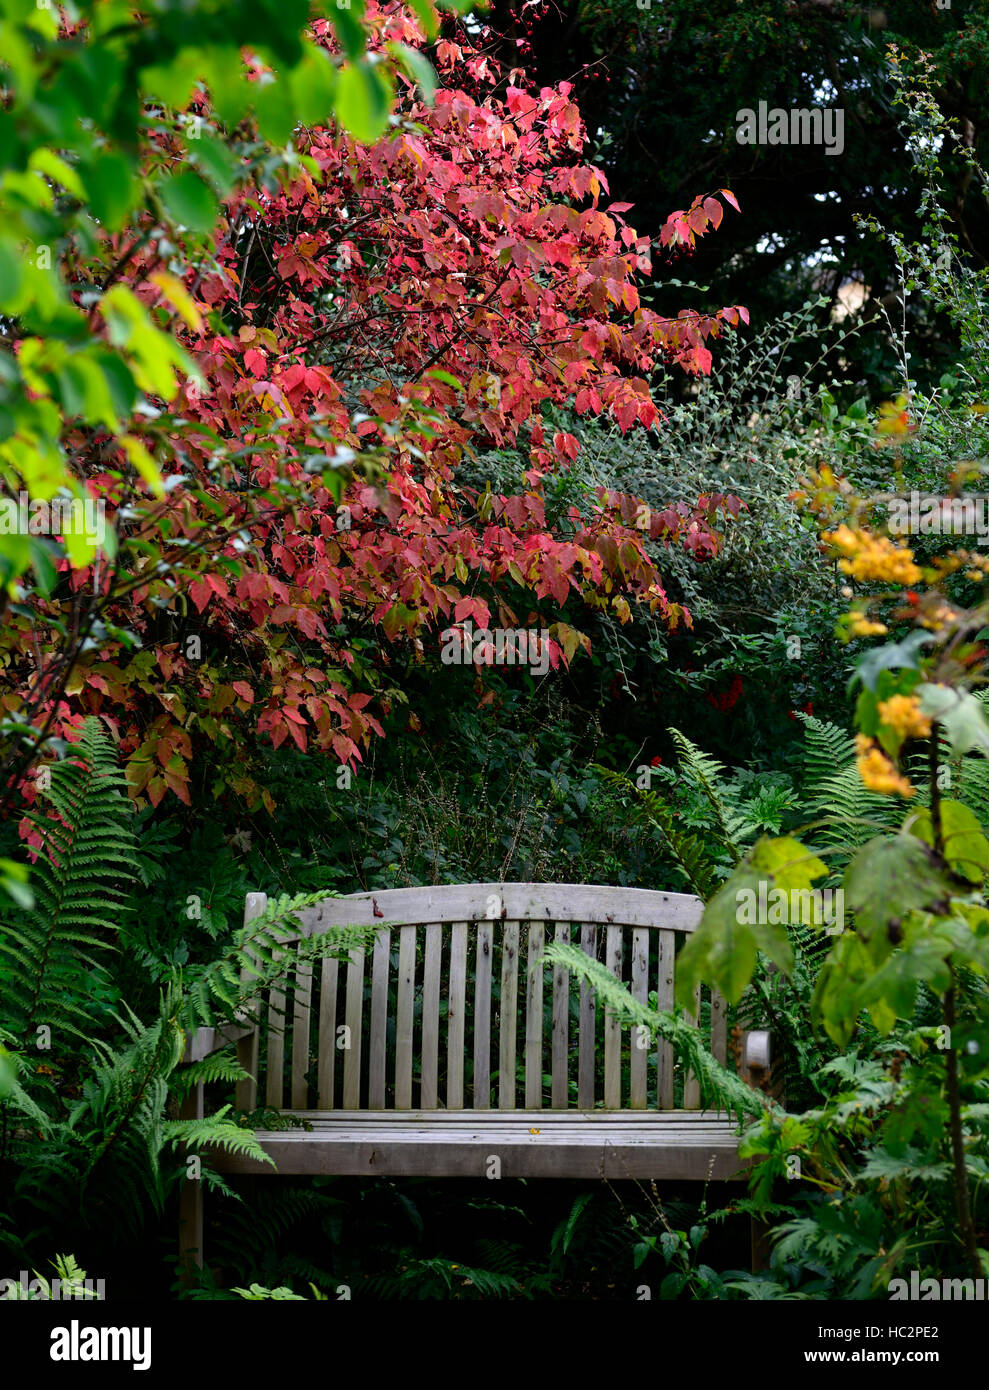 euonymus alatus red leaves autumn bench seat quiet corner garden gardening solitude peace tranquil tranquility RM Floral Stock Photo